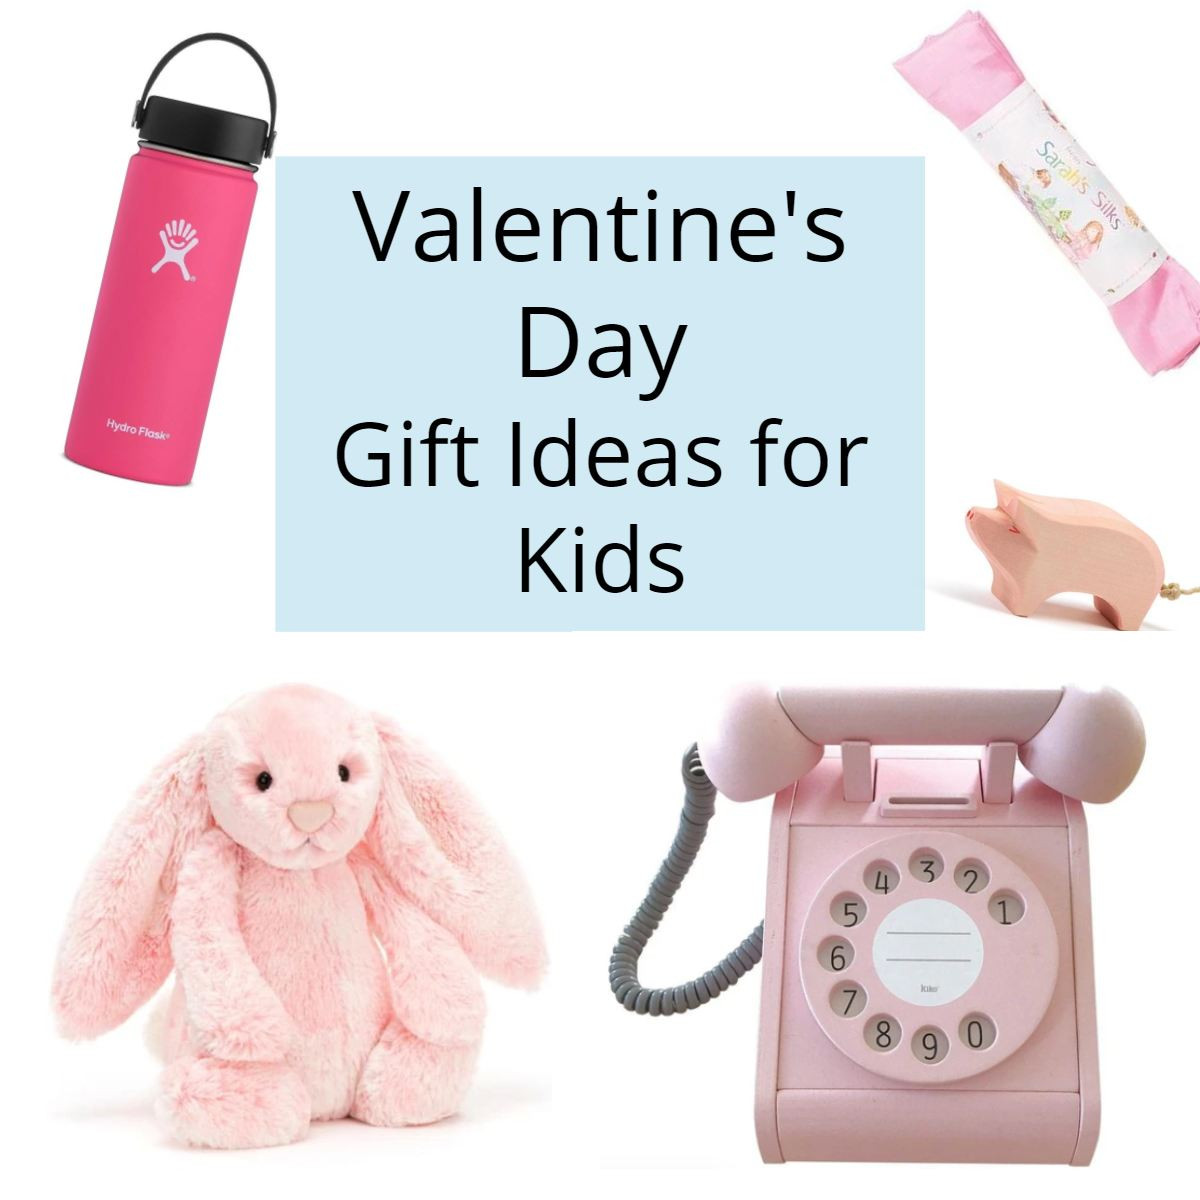 Ideas For Valentines Day Gift
 Valentine’s Day Gift Ideas for Kids 2020 – The Modern